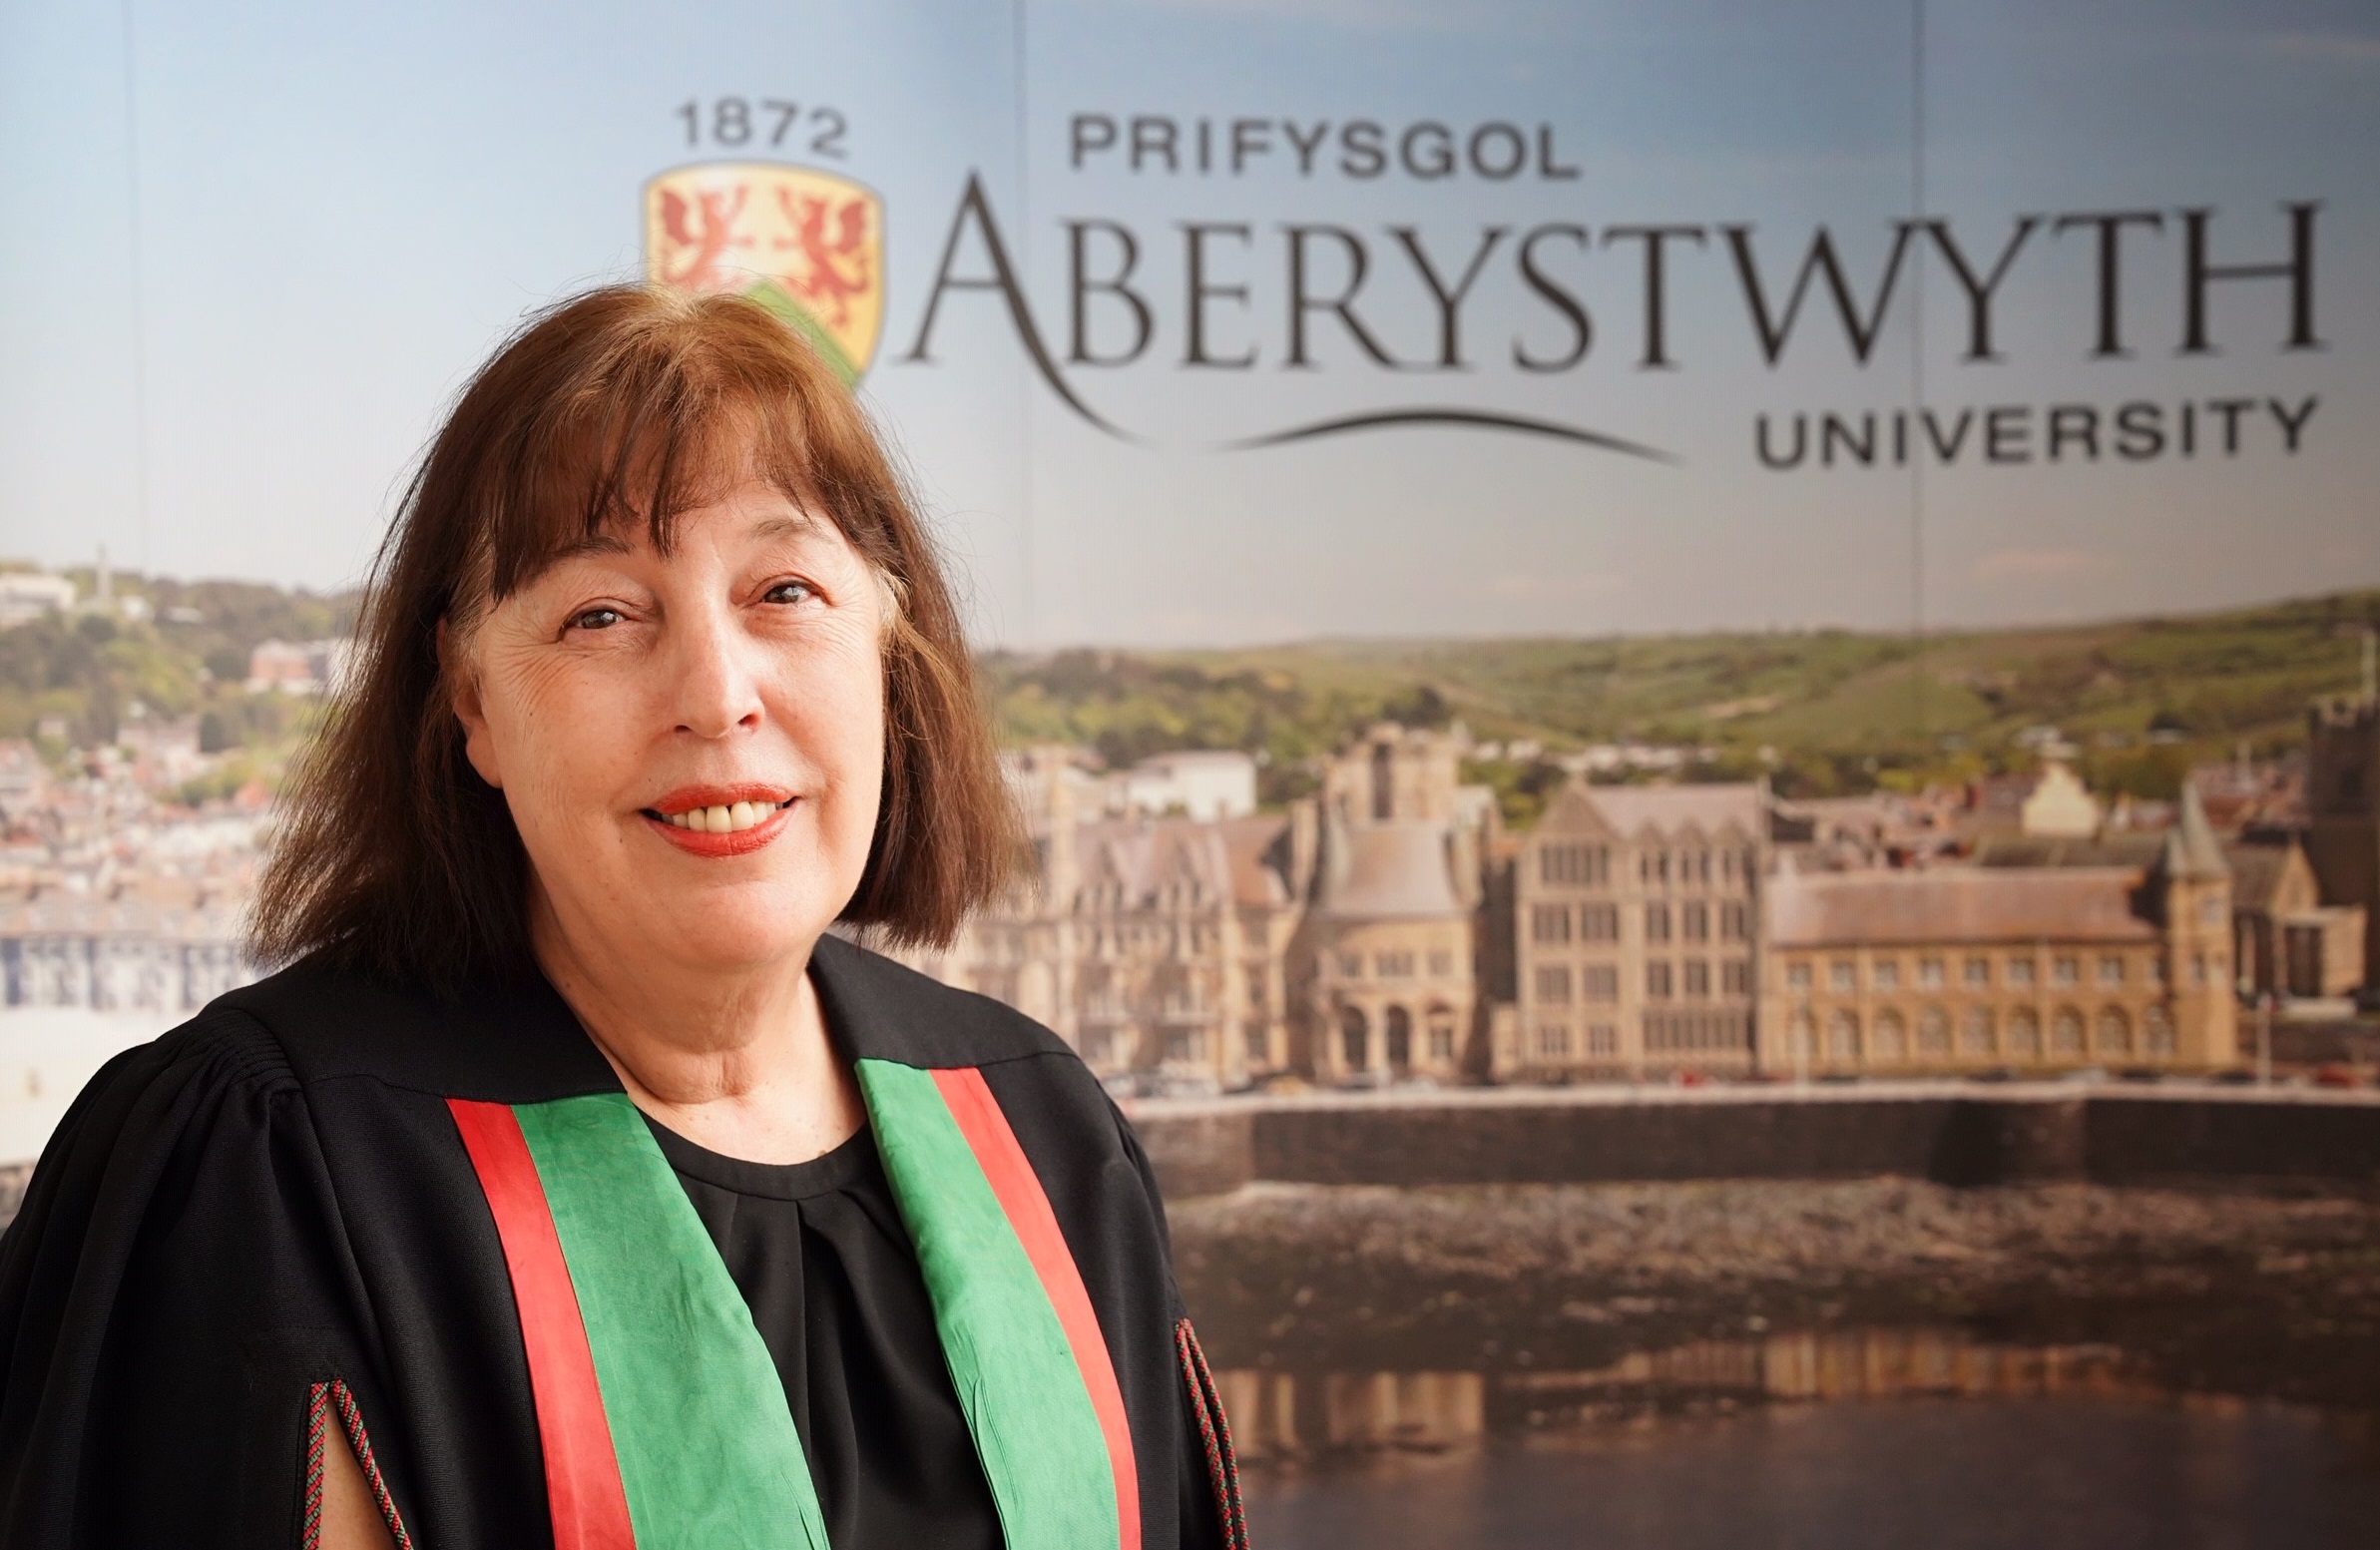 Professor Virginia Gamba, Under Secretary General of the United Nations with the function of Special Representative of the Secretary General for Children and Armed Conflict, and Honorary Fellow of Aberystwyth University